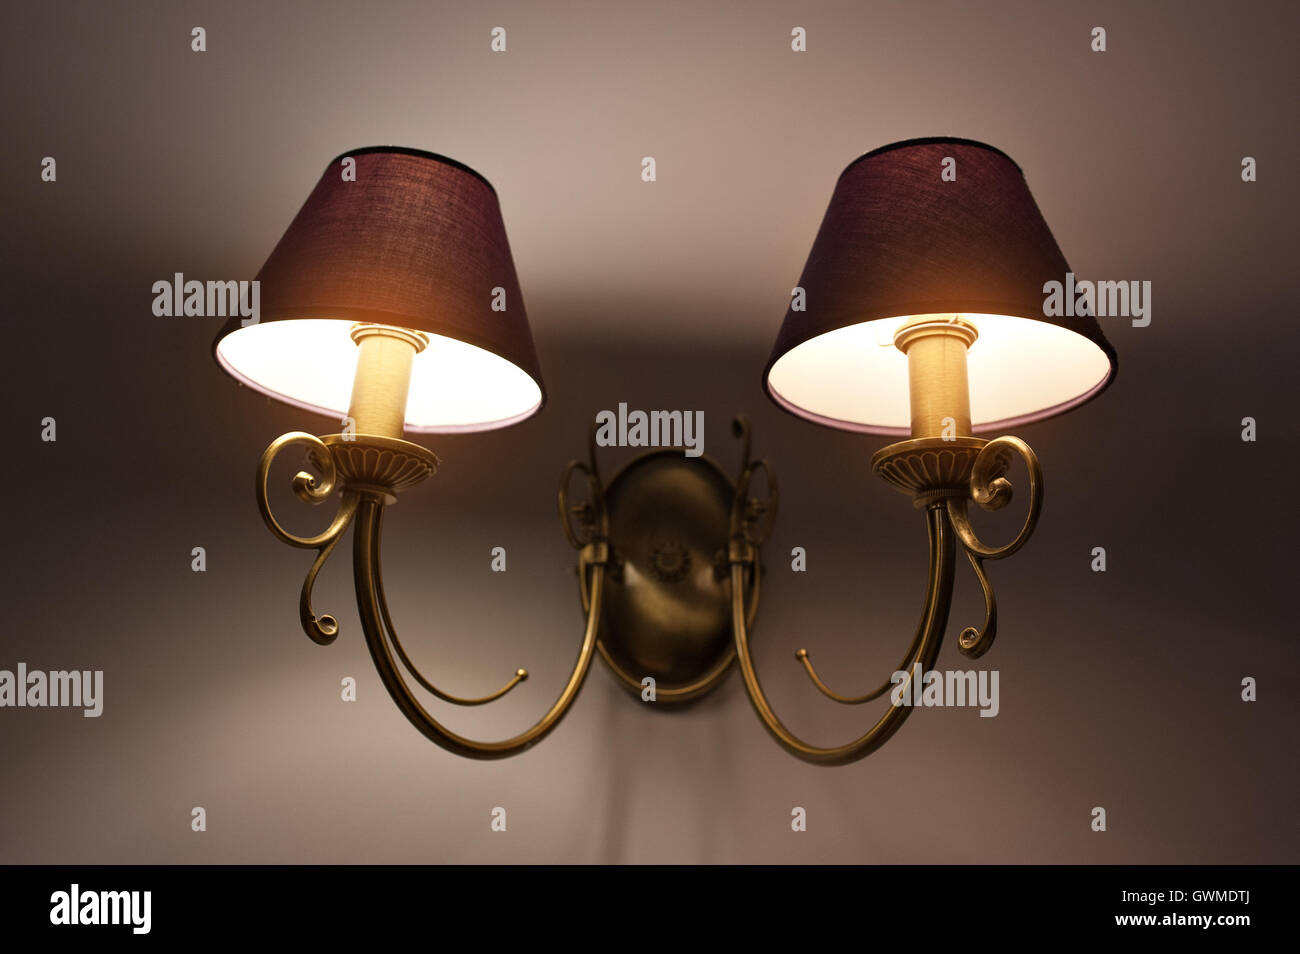 Two Wall lamps with yellow shade from canvas Stock Photo